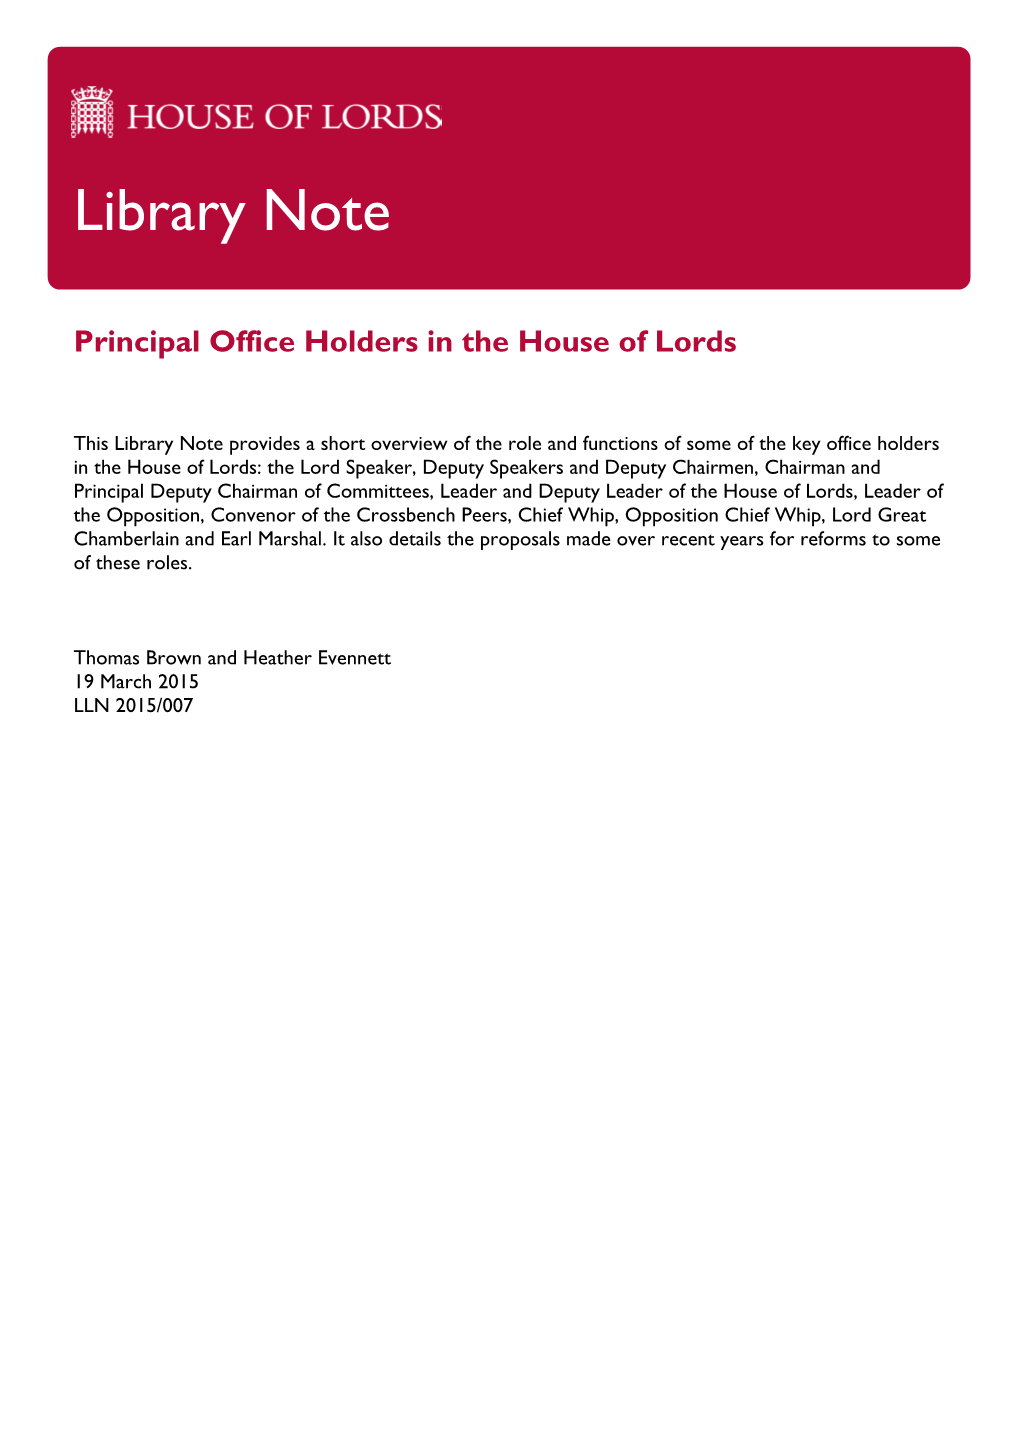 Office Holders in the House of Lords